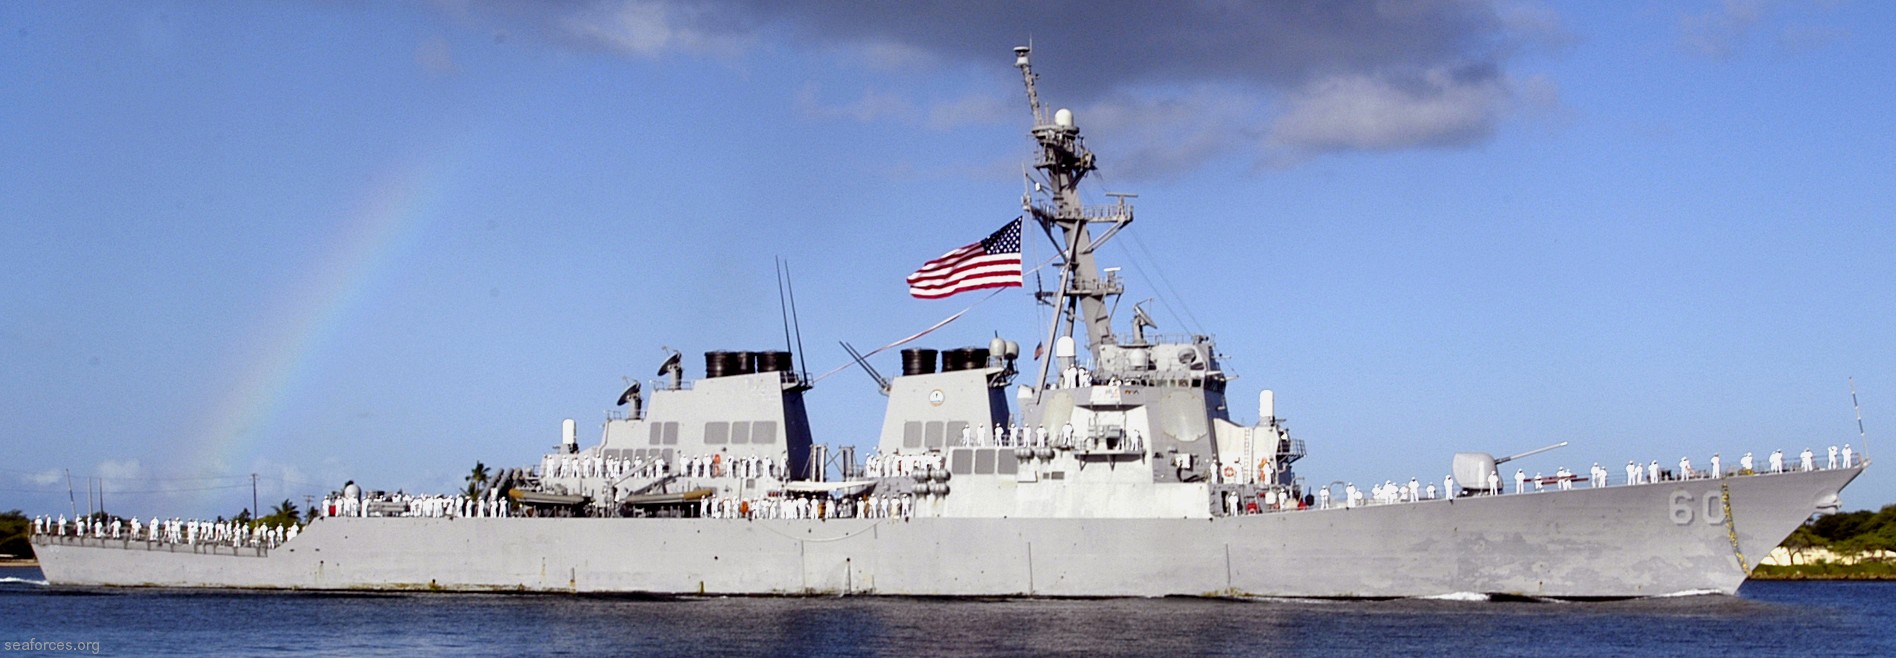 ddg-60 uss paul hamilton guided missile destroyer us navy 45